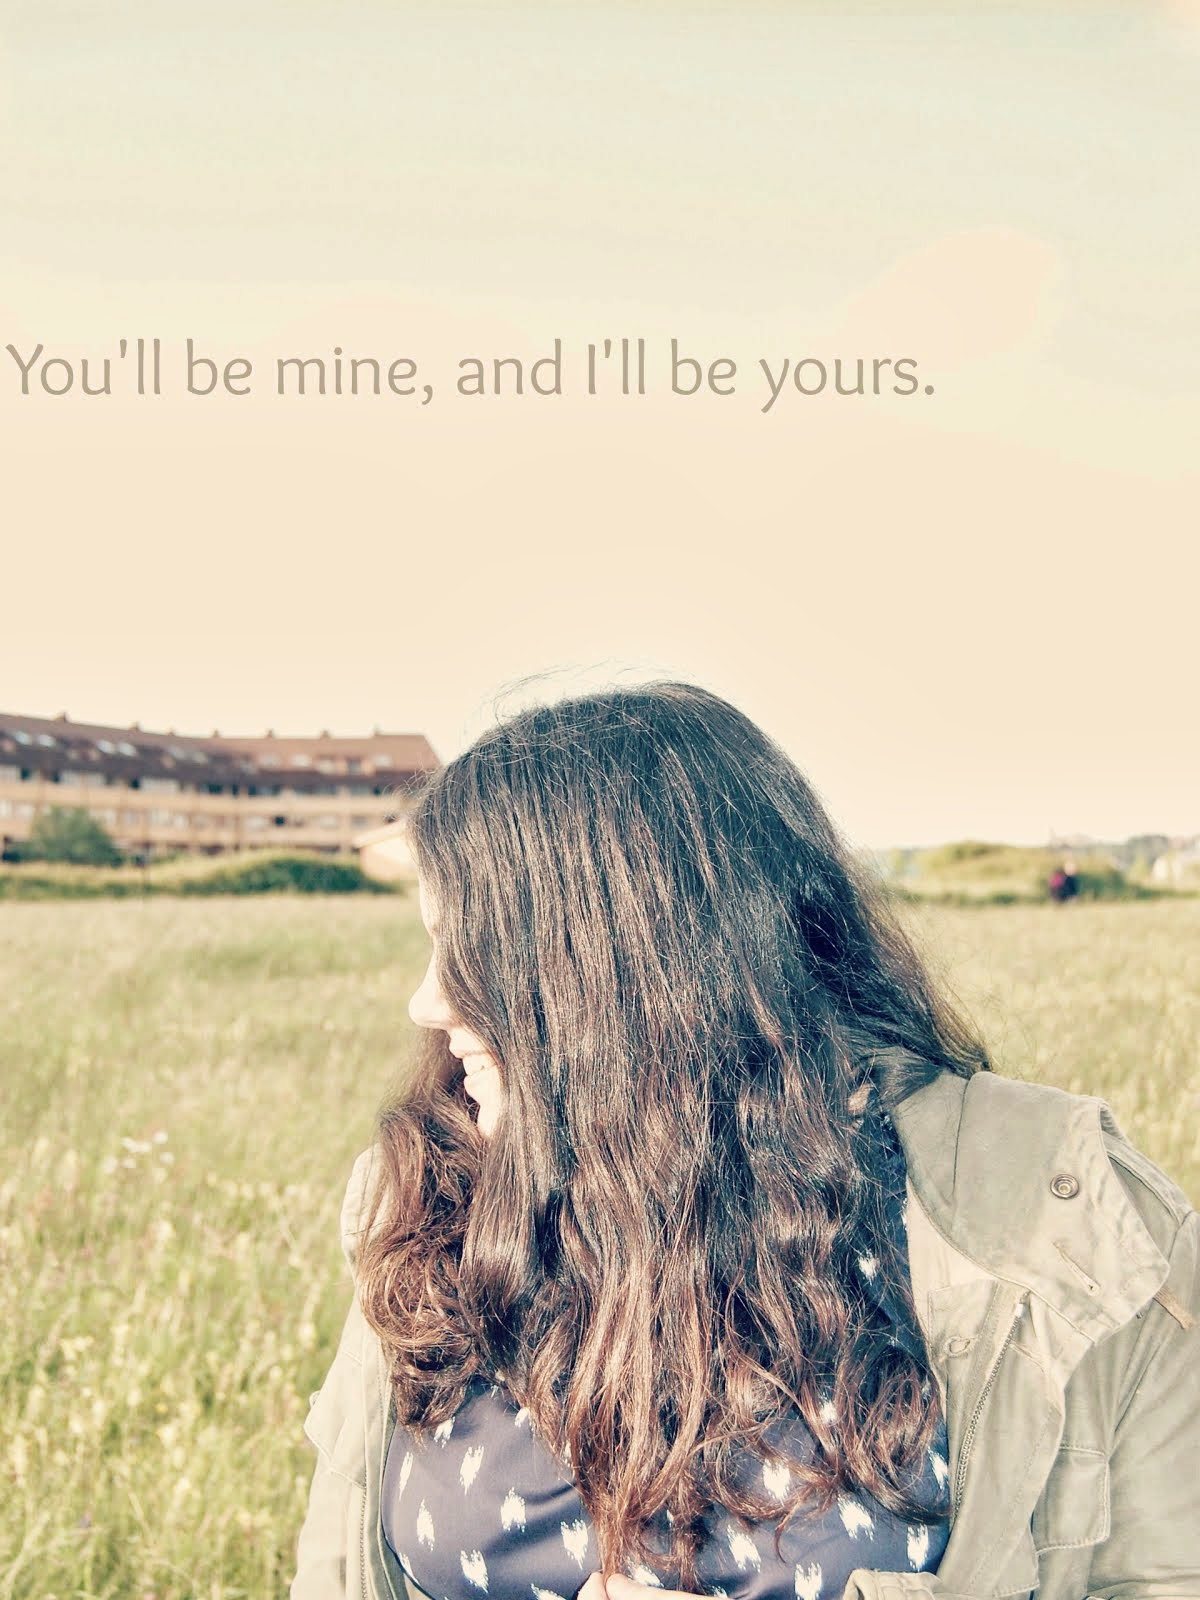 ''You'll be mine, and I'll be yours''.